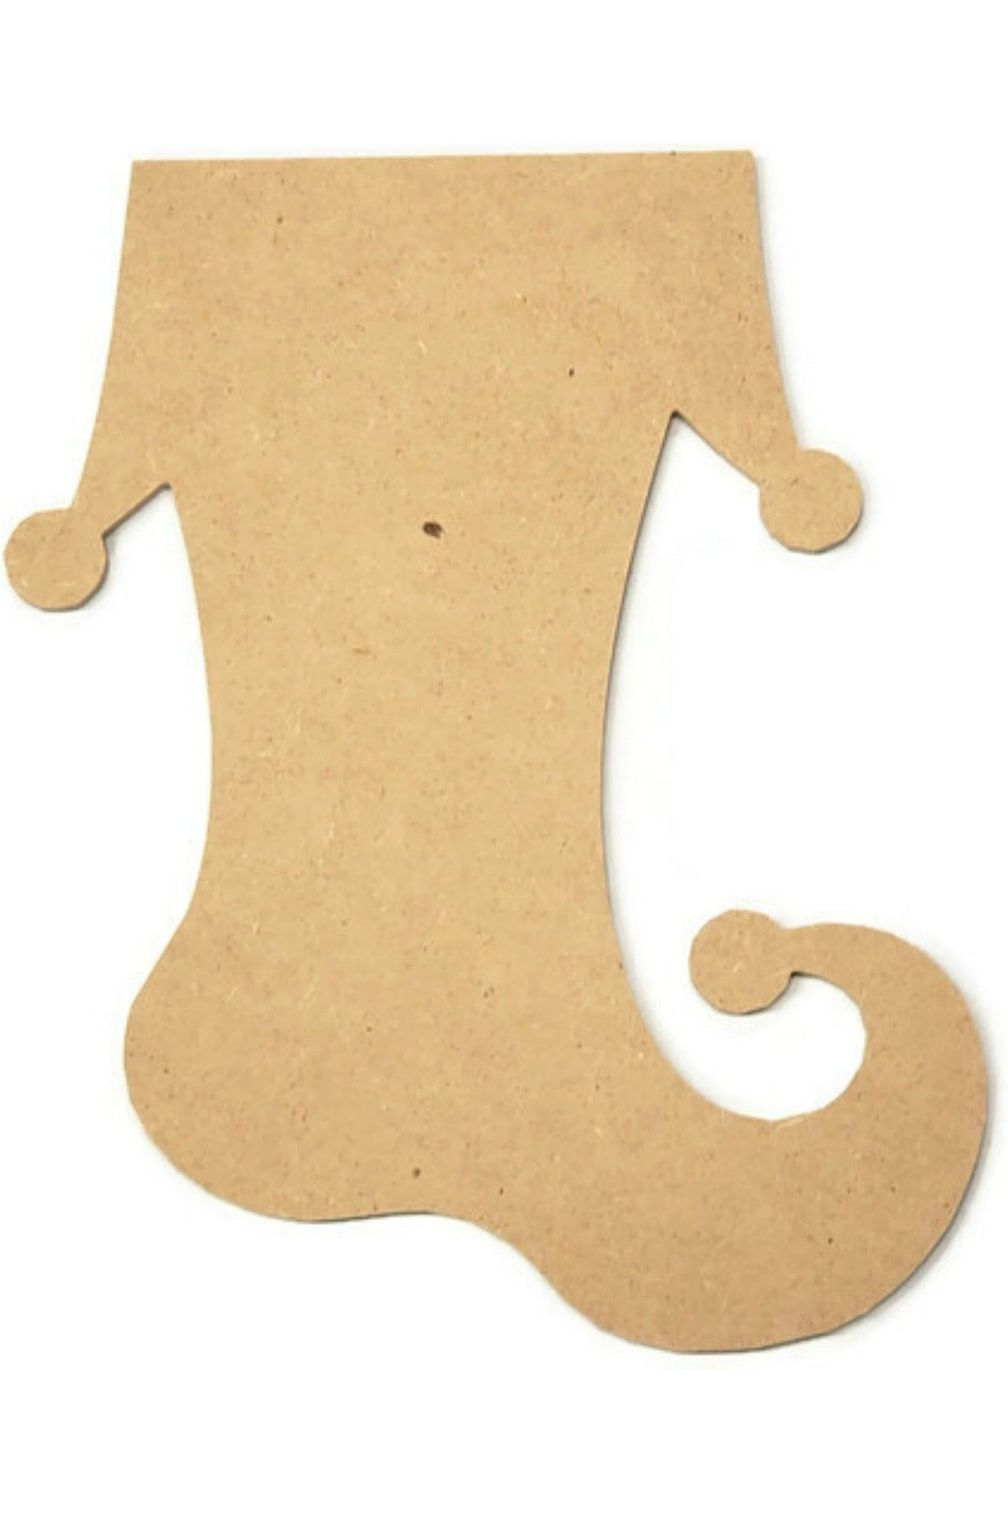 Shop For Stocking Shaped Wood Cutout - Unfinished Wood